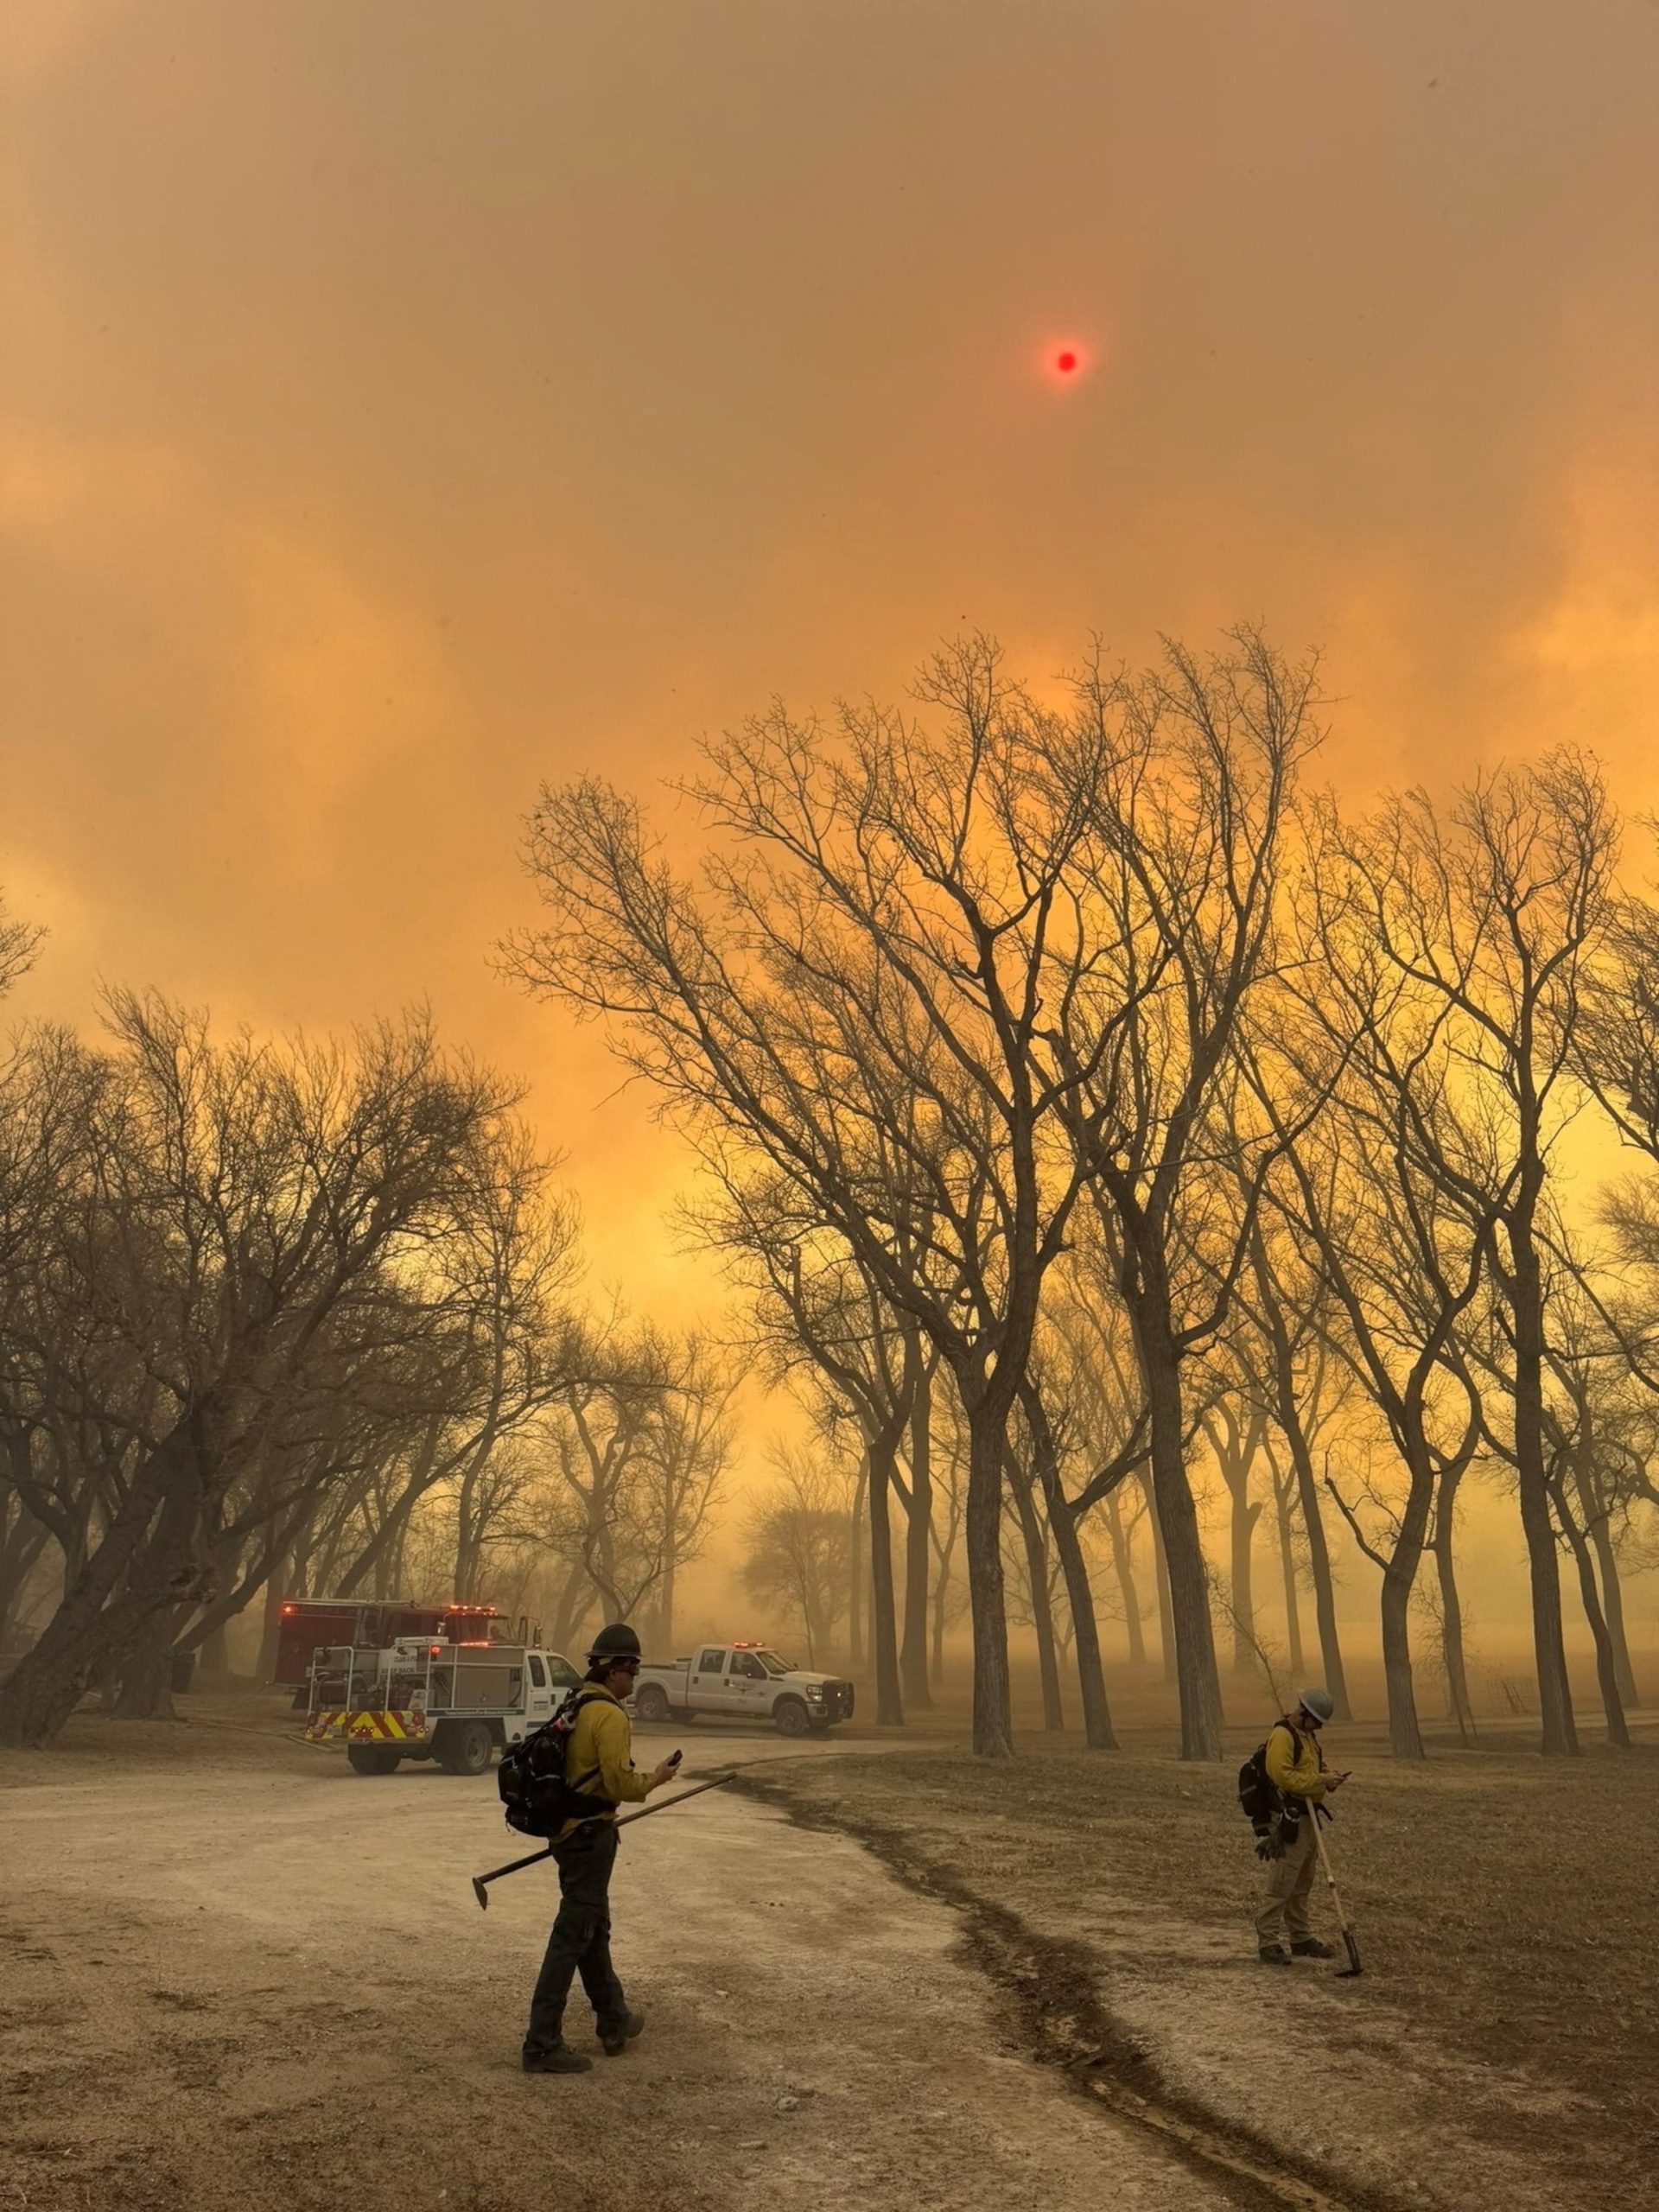 Texas issues disaster declaration in response to devastating wildfires